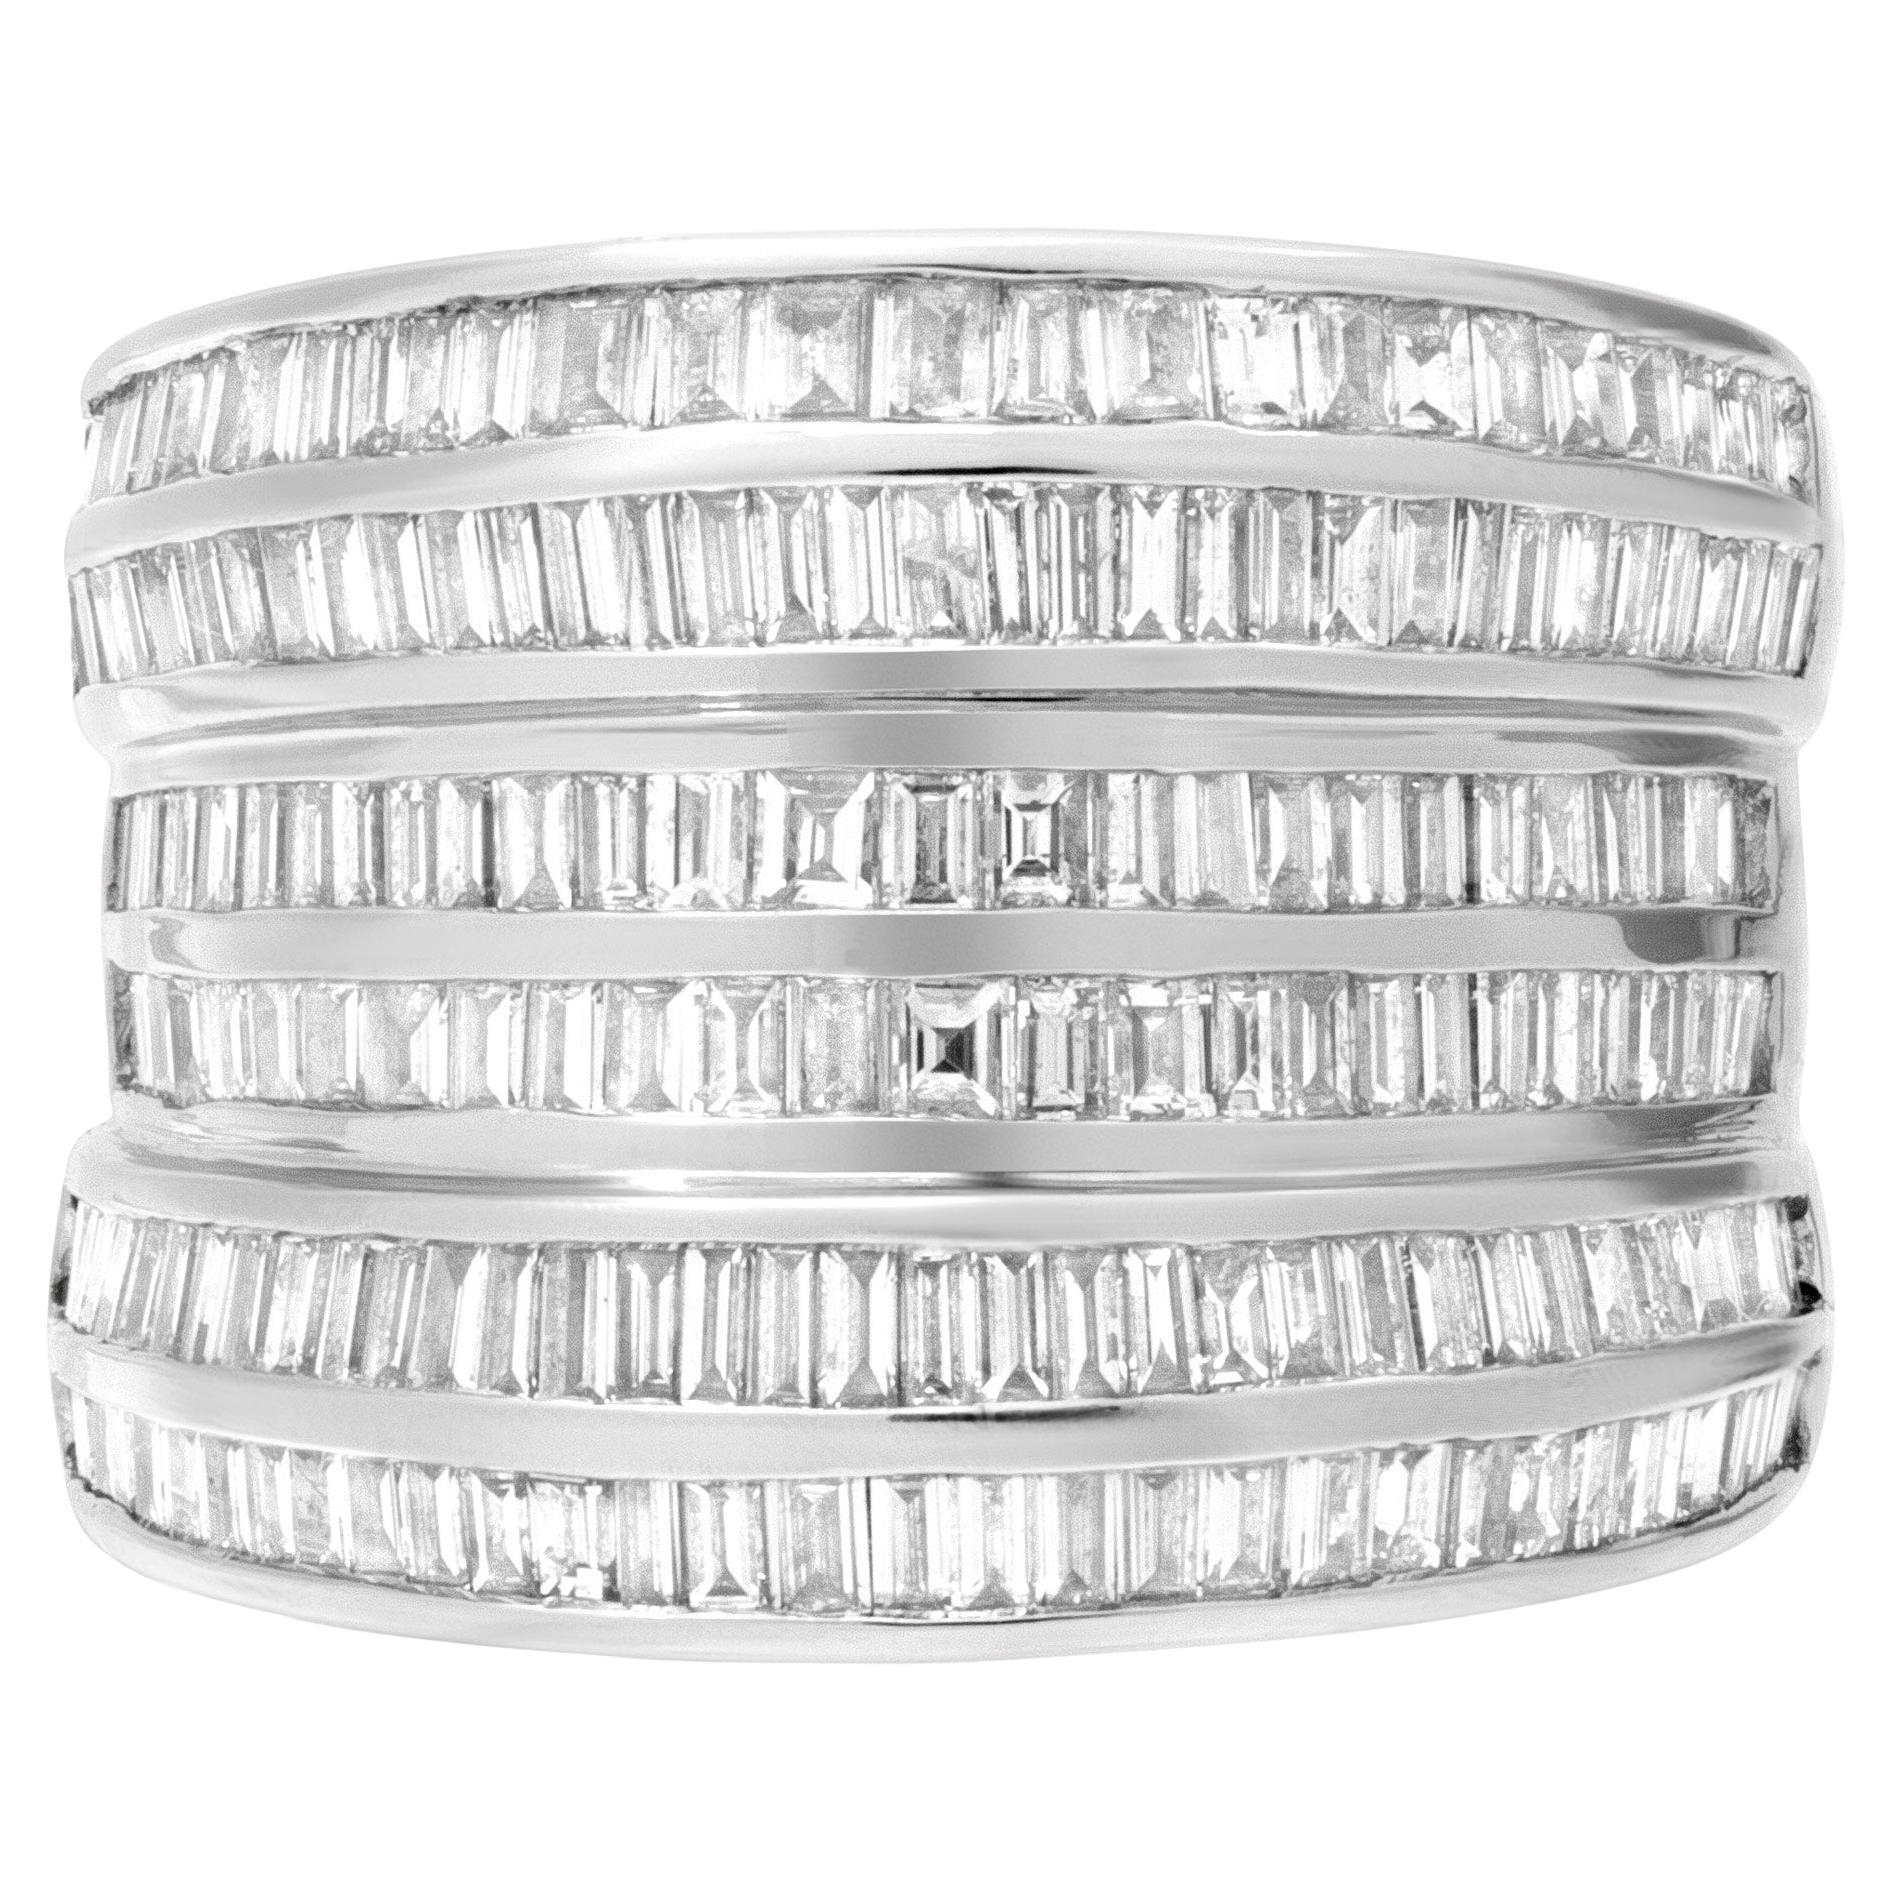 Baguette Diamond Ring 6 Rows of Diamonds Approx. 2.0 Cts in 18 K White Gold